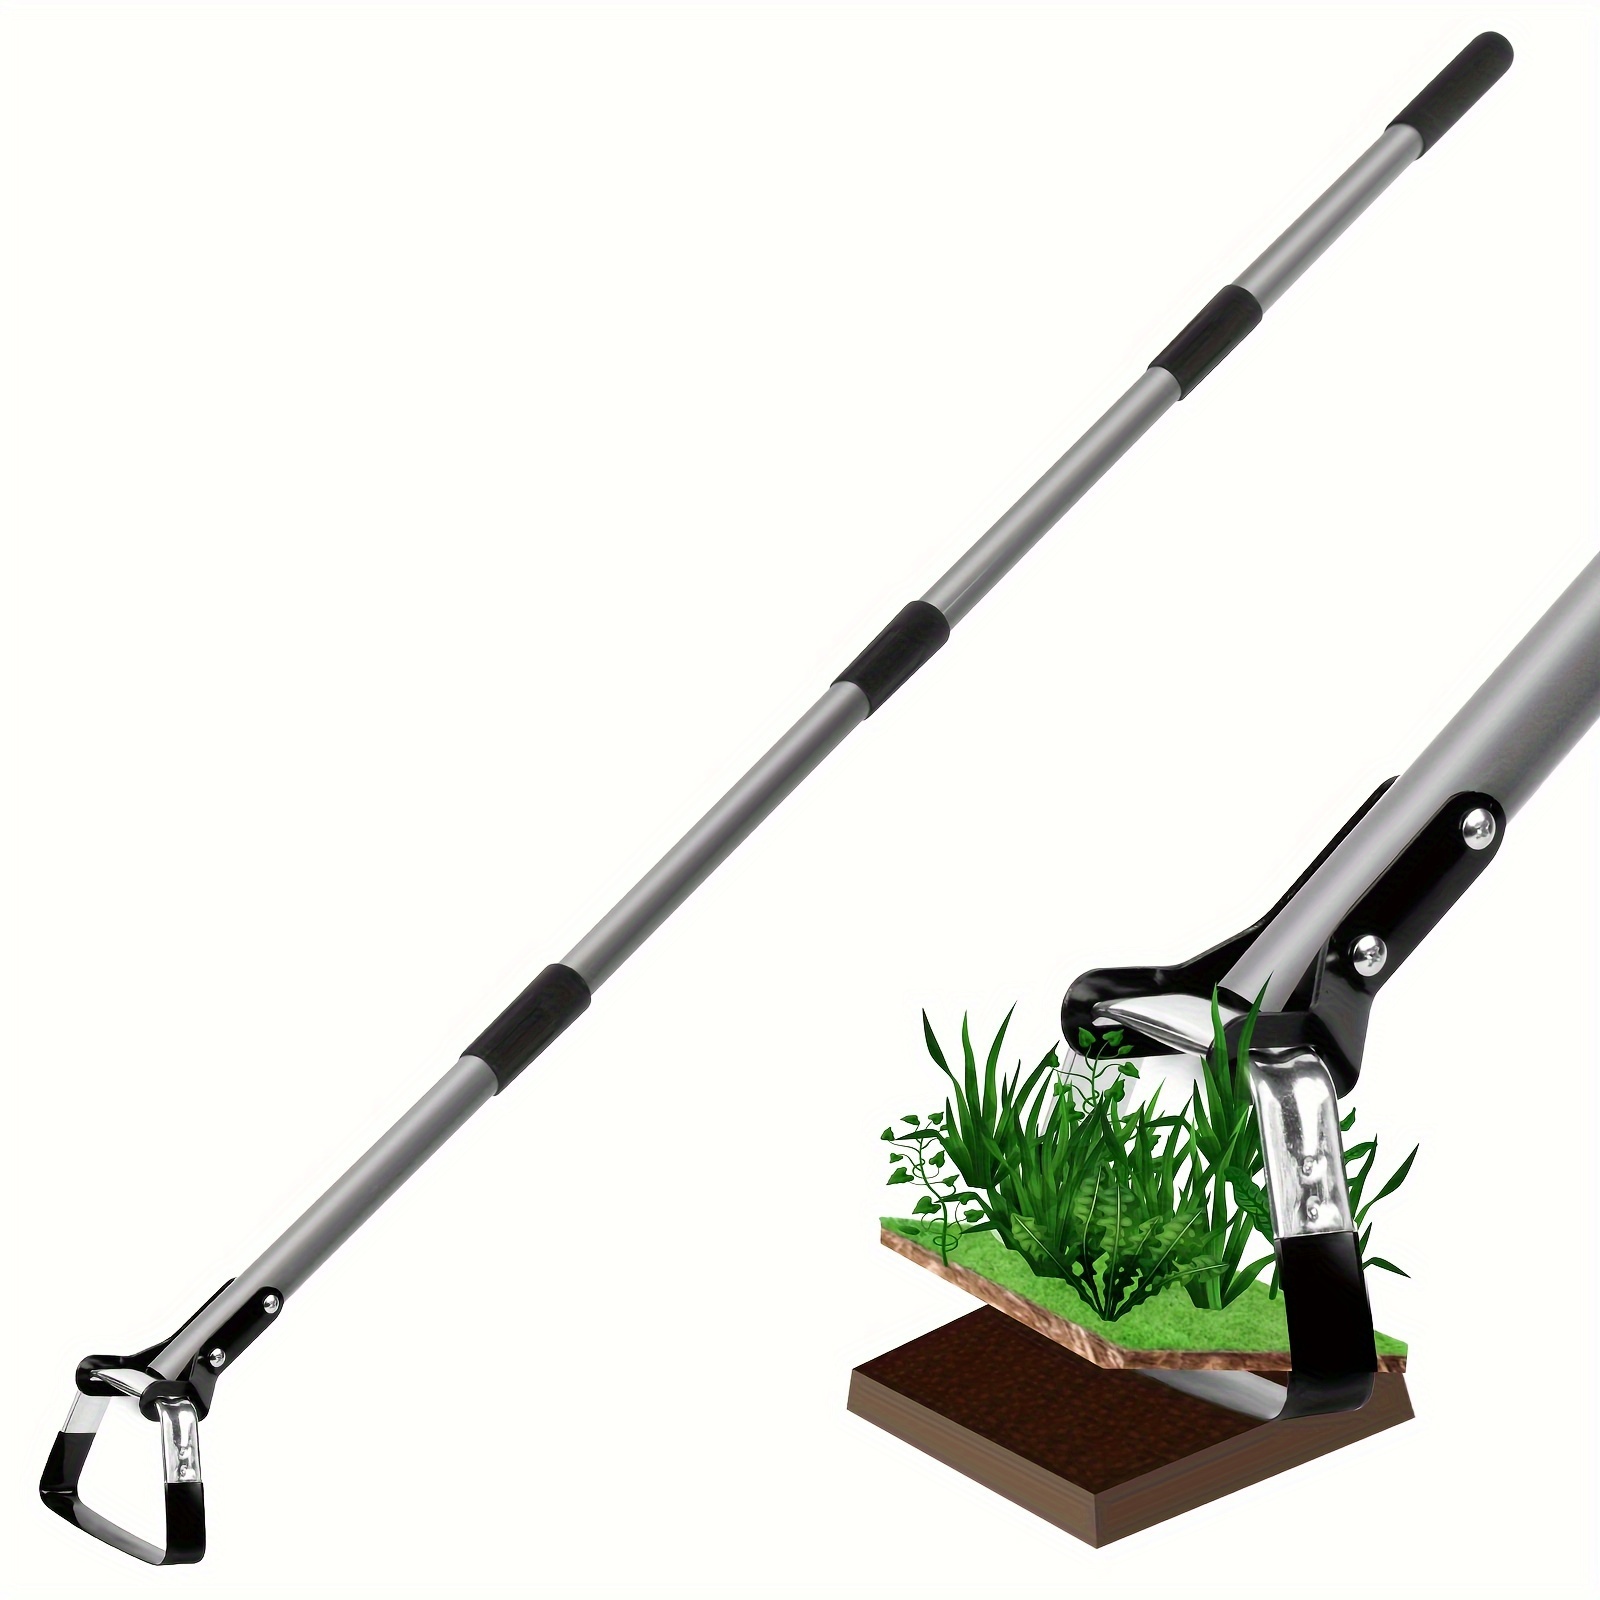 

1 Piece Upgraded Action Hoe For Weeding Stirrup Hoe Tools For Garden With Adjustable 56" Loop Hoe Gardening Weeder Cultivator, Sharp Durable Metal Handle Weeding Rake With Cushioned Grip